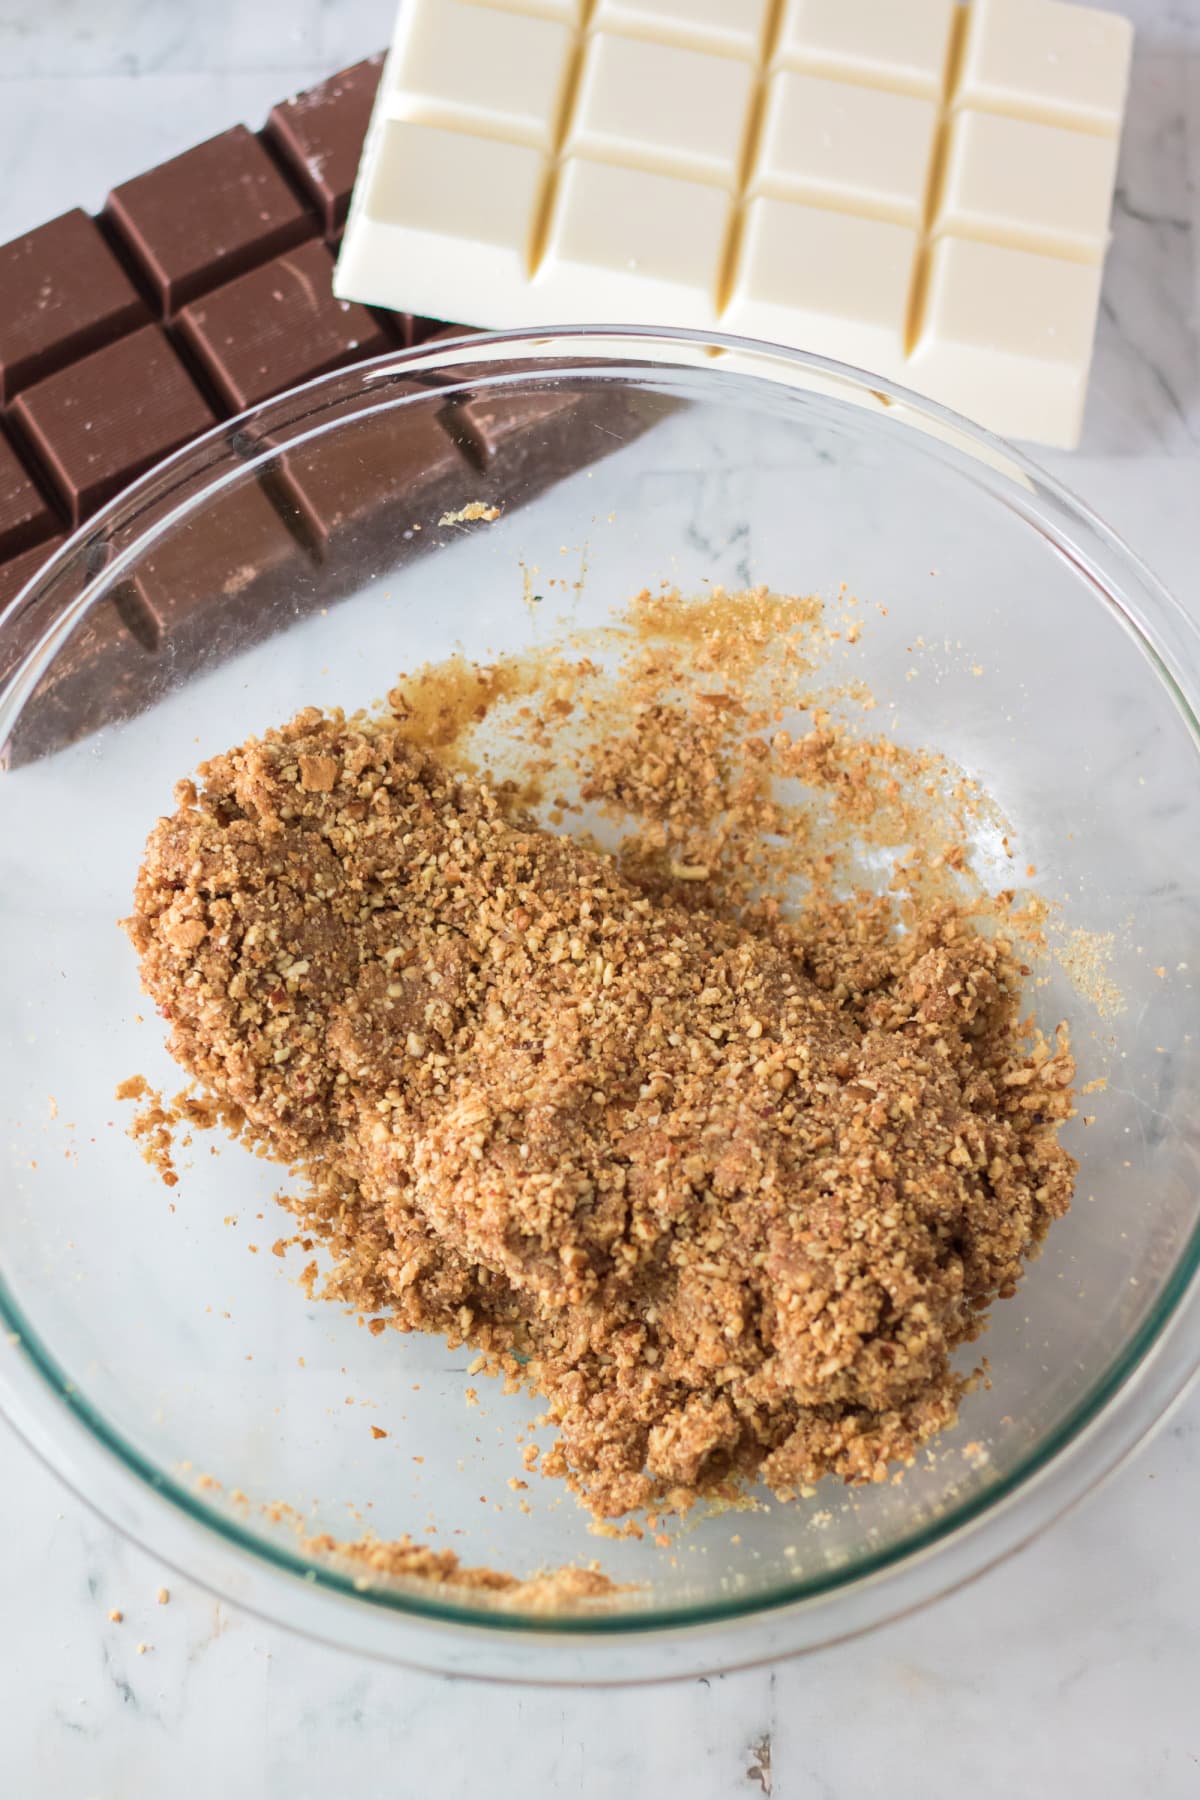 combine pecan truffle mixture until it forms a ball